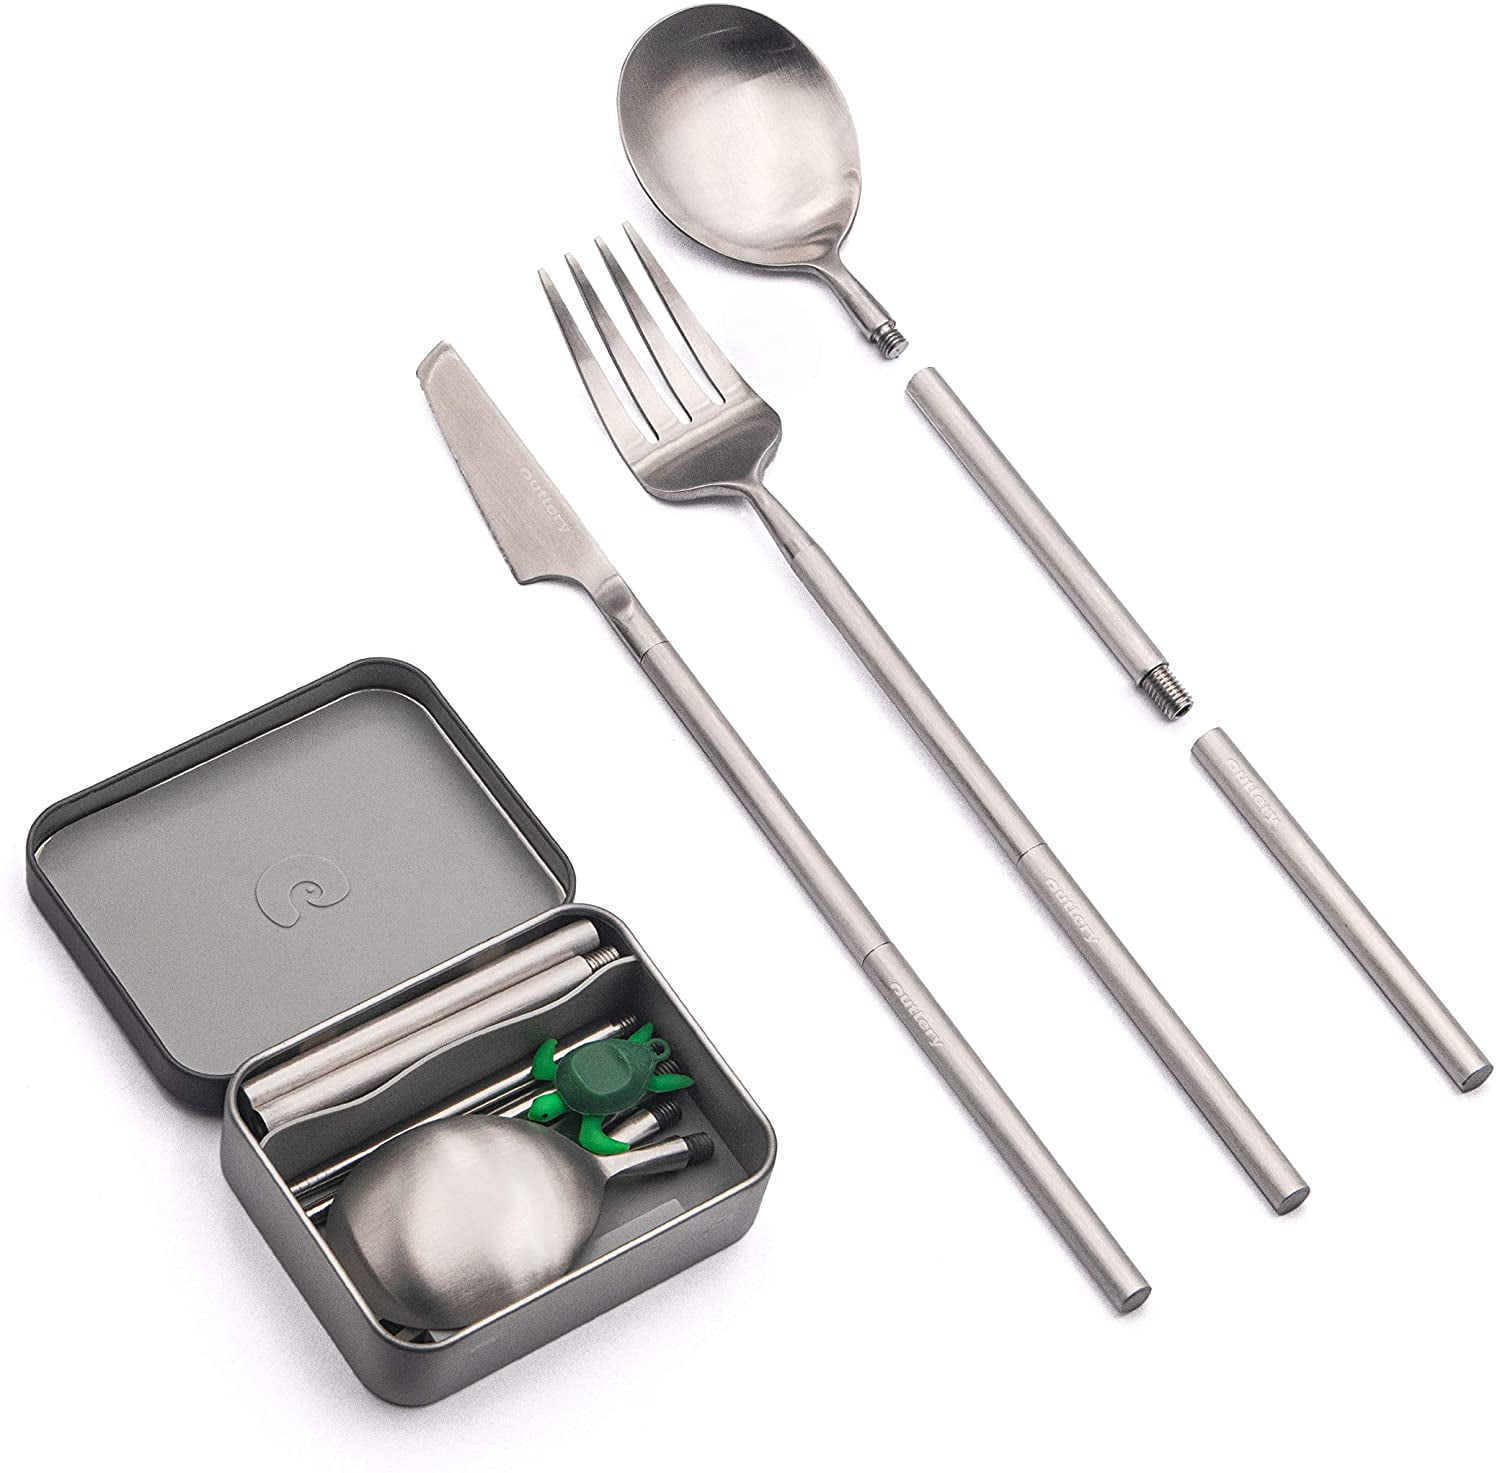 8PACK Portable Utensils Travel Camping Cutlery Set Stainless Steel Flatware US 